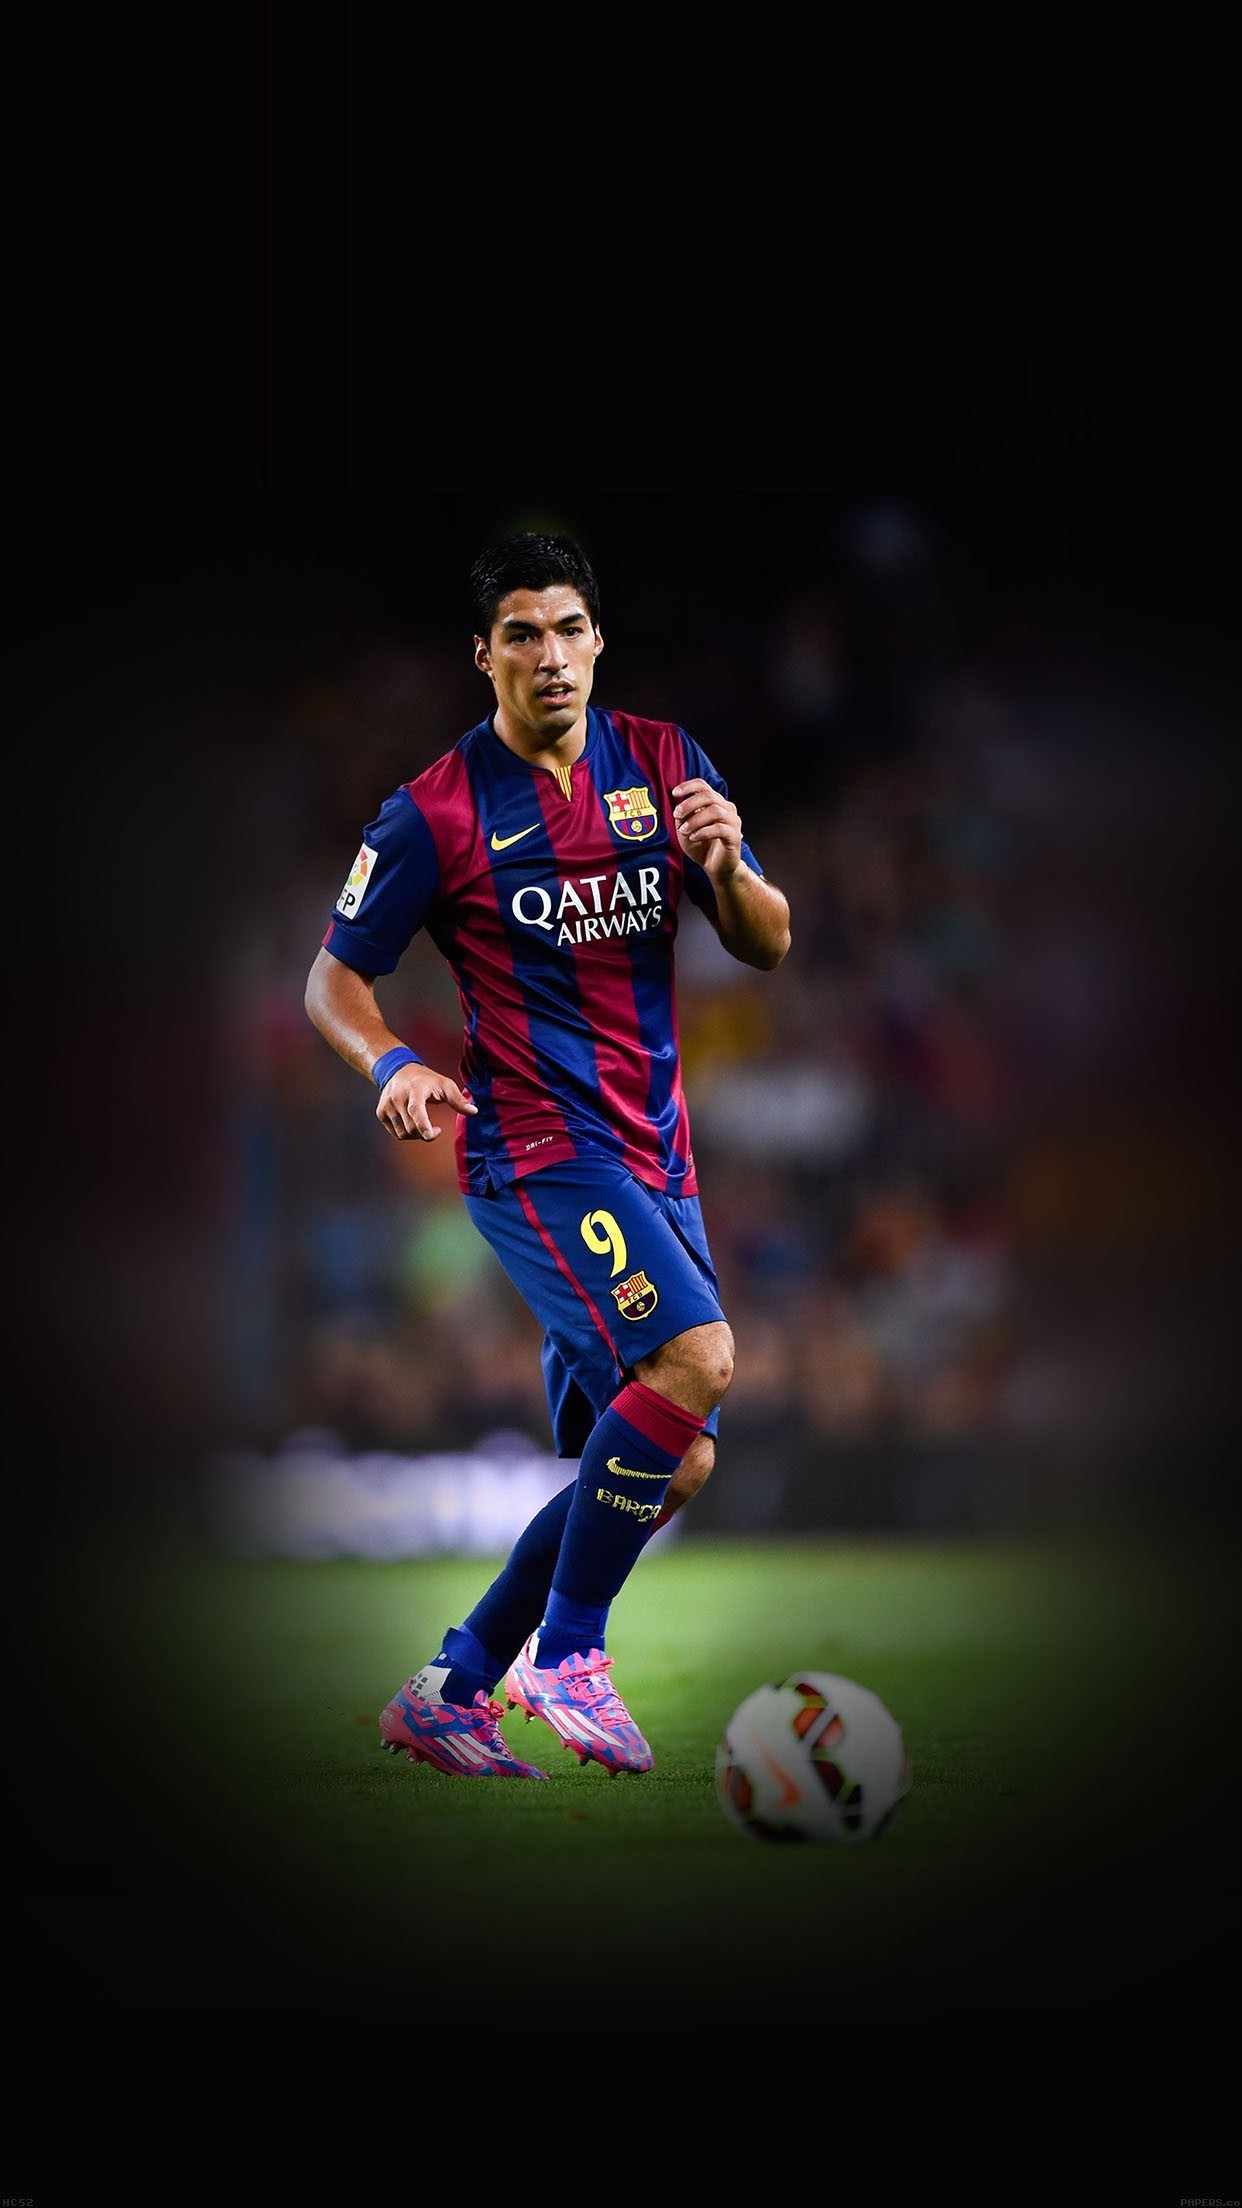 Cool Soccer Wallpapers for iPhone 66 images